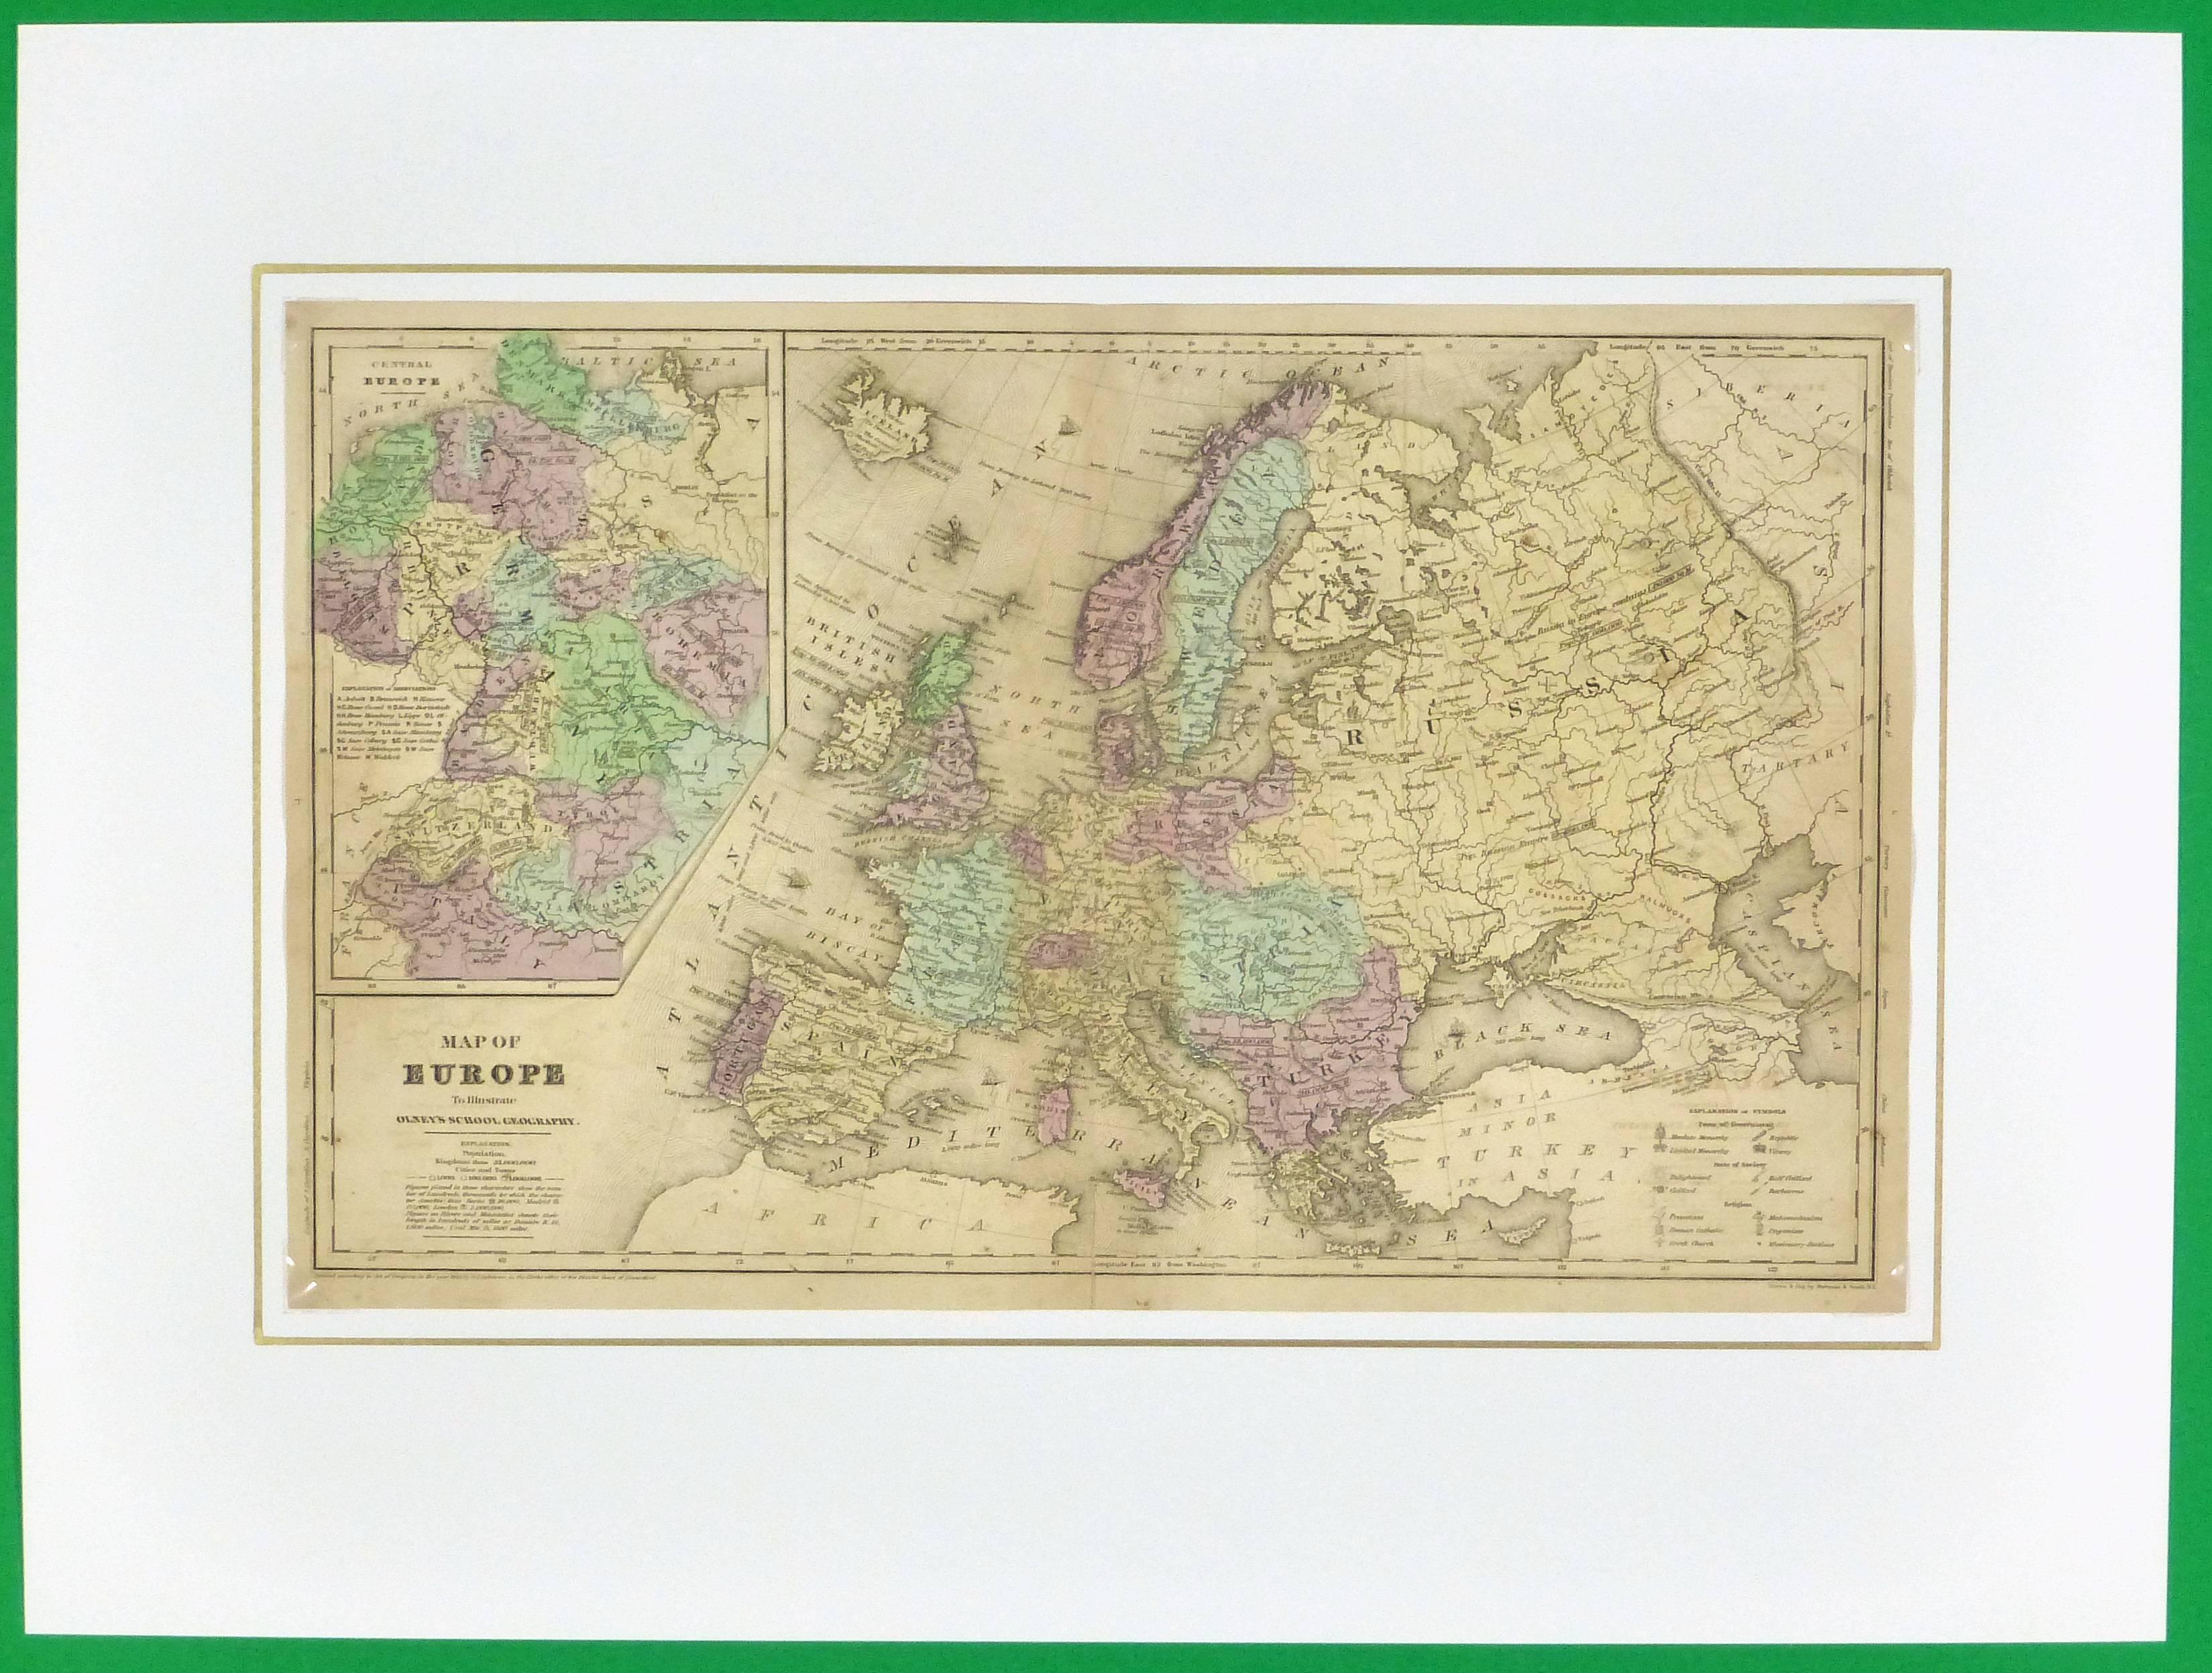 Over 150 year old engraved map of Europe by Olney from 1844.  Original hand color.  Shows Northern Europe, Prussia and Germany.  

Original antique map on paper displayed on a white mat with a gold border. Mat fits a standard-size frame.  Archival